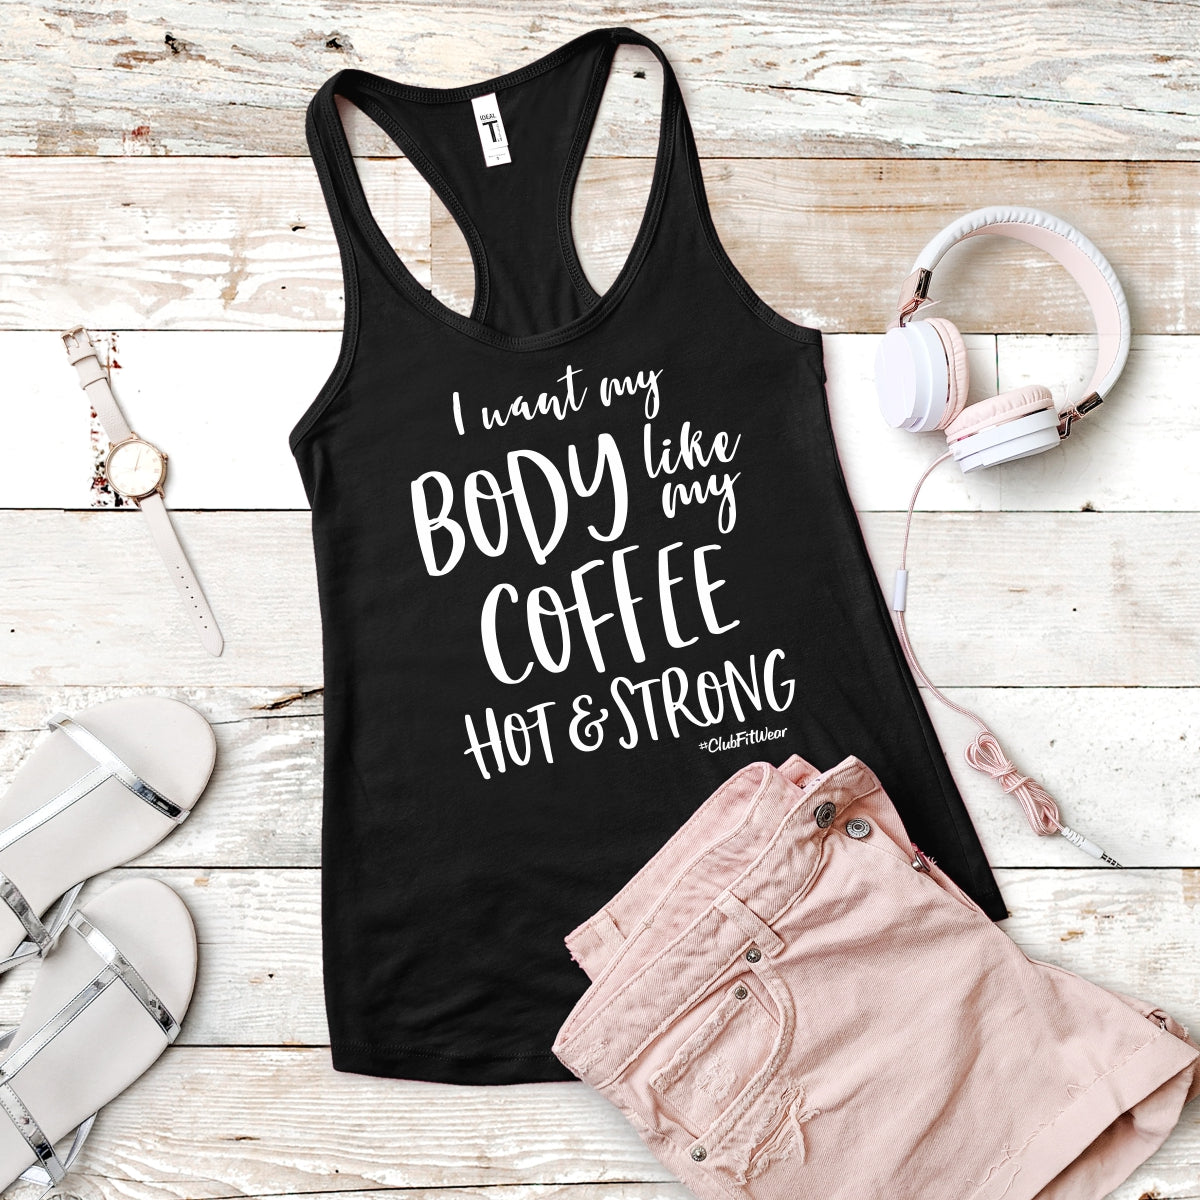 I want my Body like my Coffee Hot & Strong